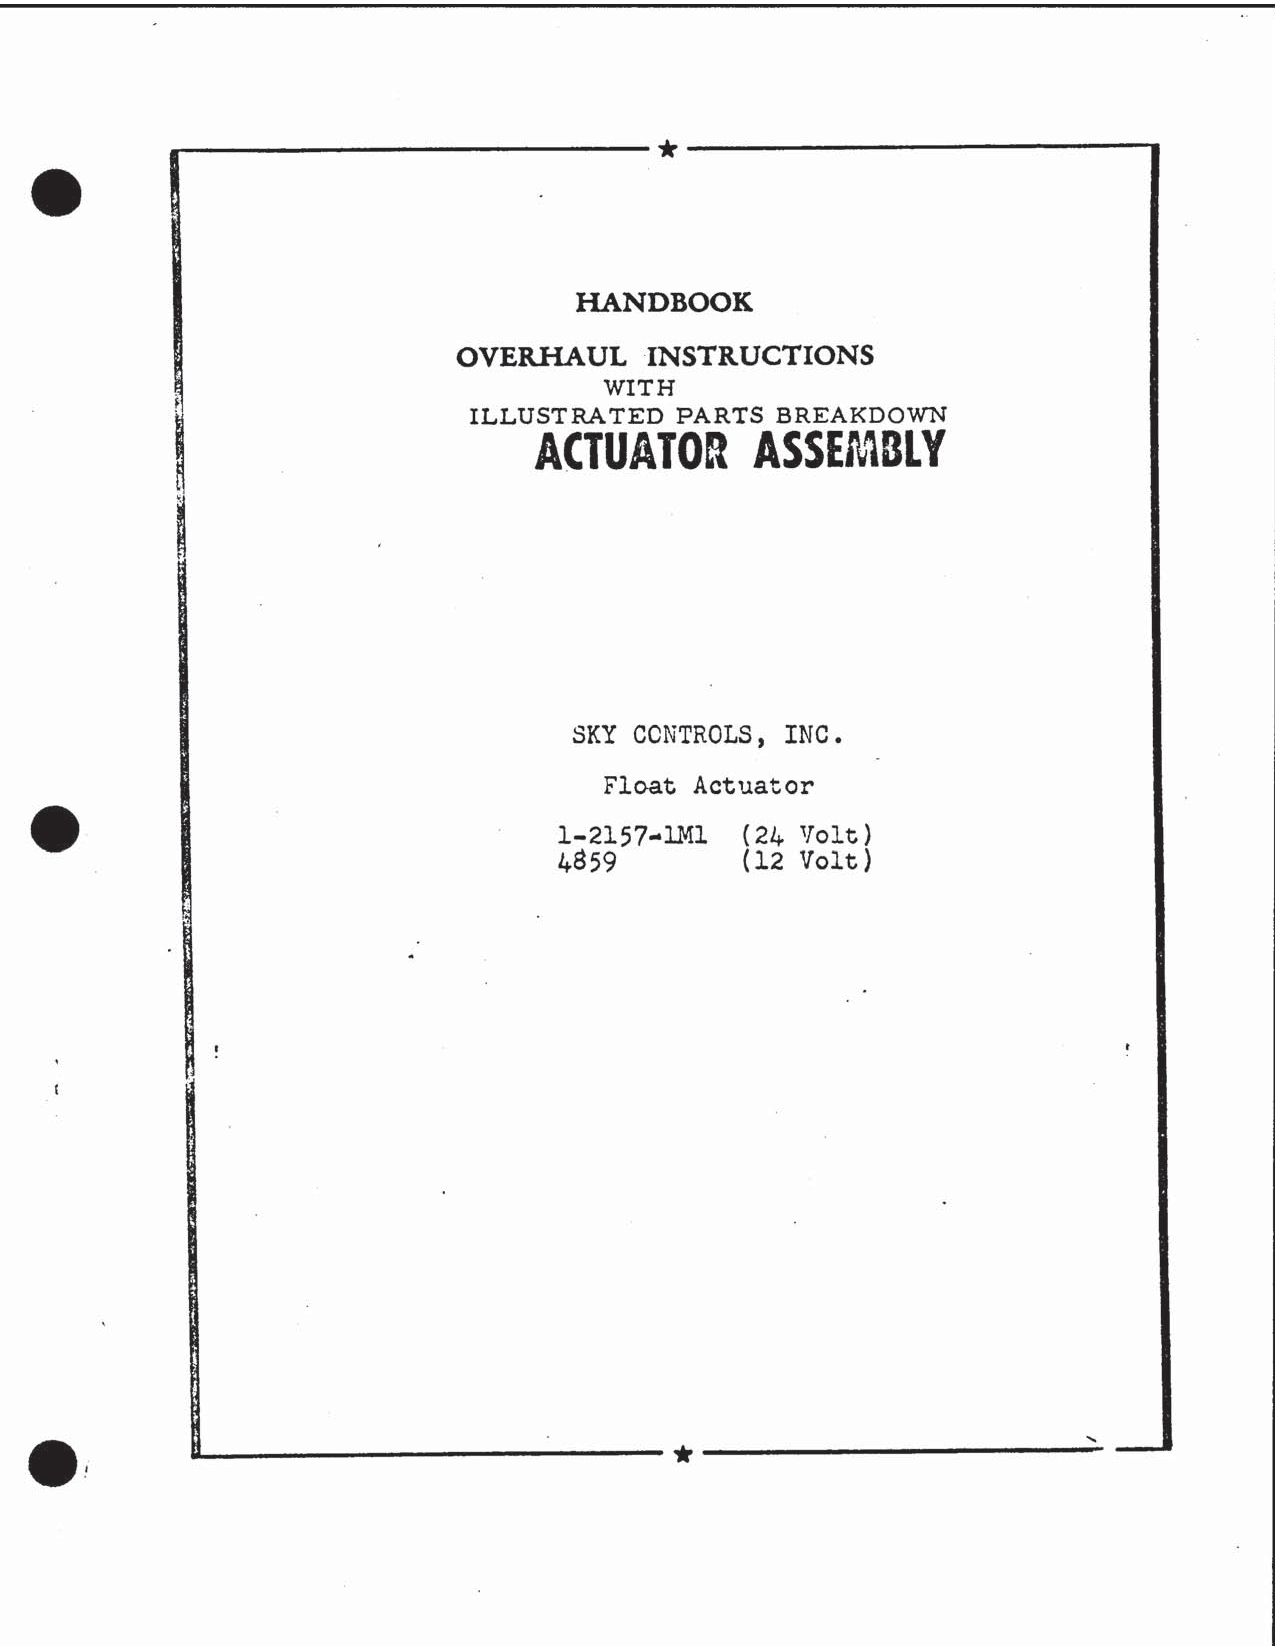 Sample page 1 from AirCorps Library document: Actuator Assembly Overhaul Instructions with Parts Breakdown